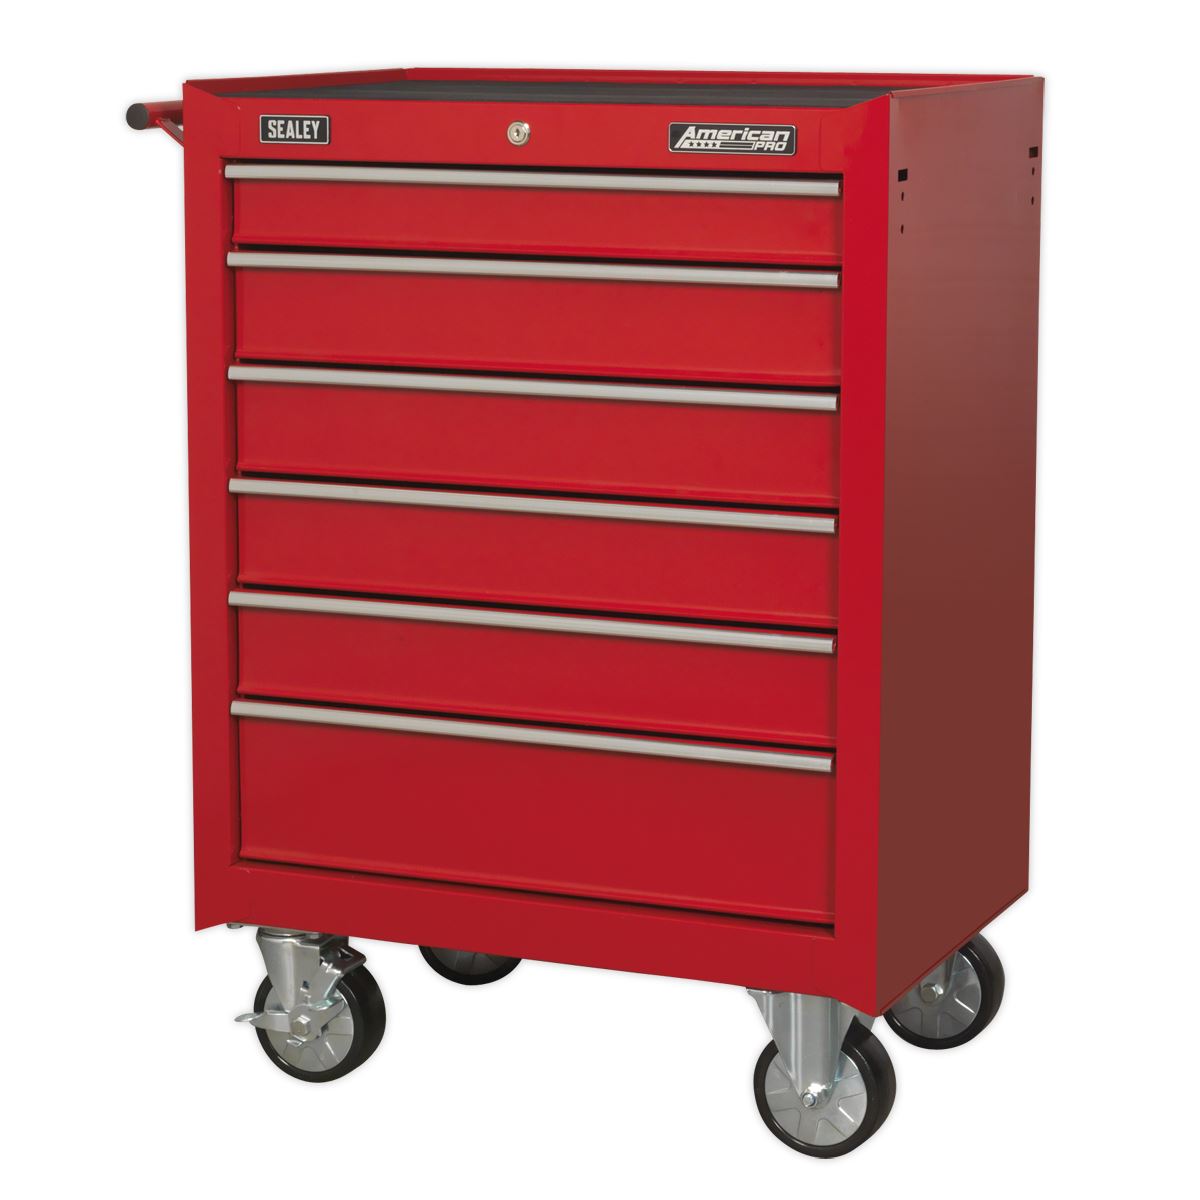 Sealey American Pro Rollcab 6 Drawer with Ball-Bearing Slides - Red